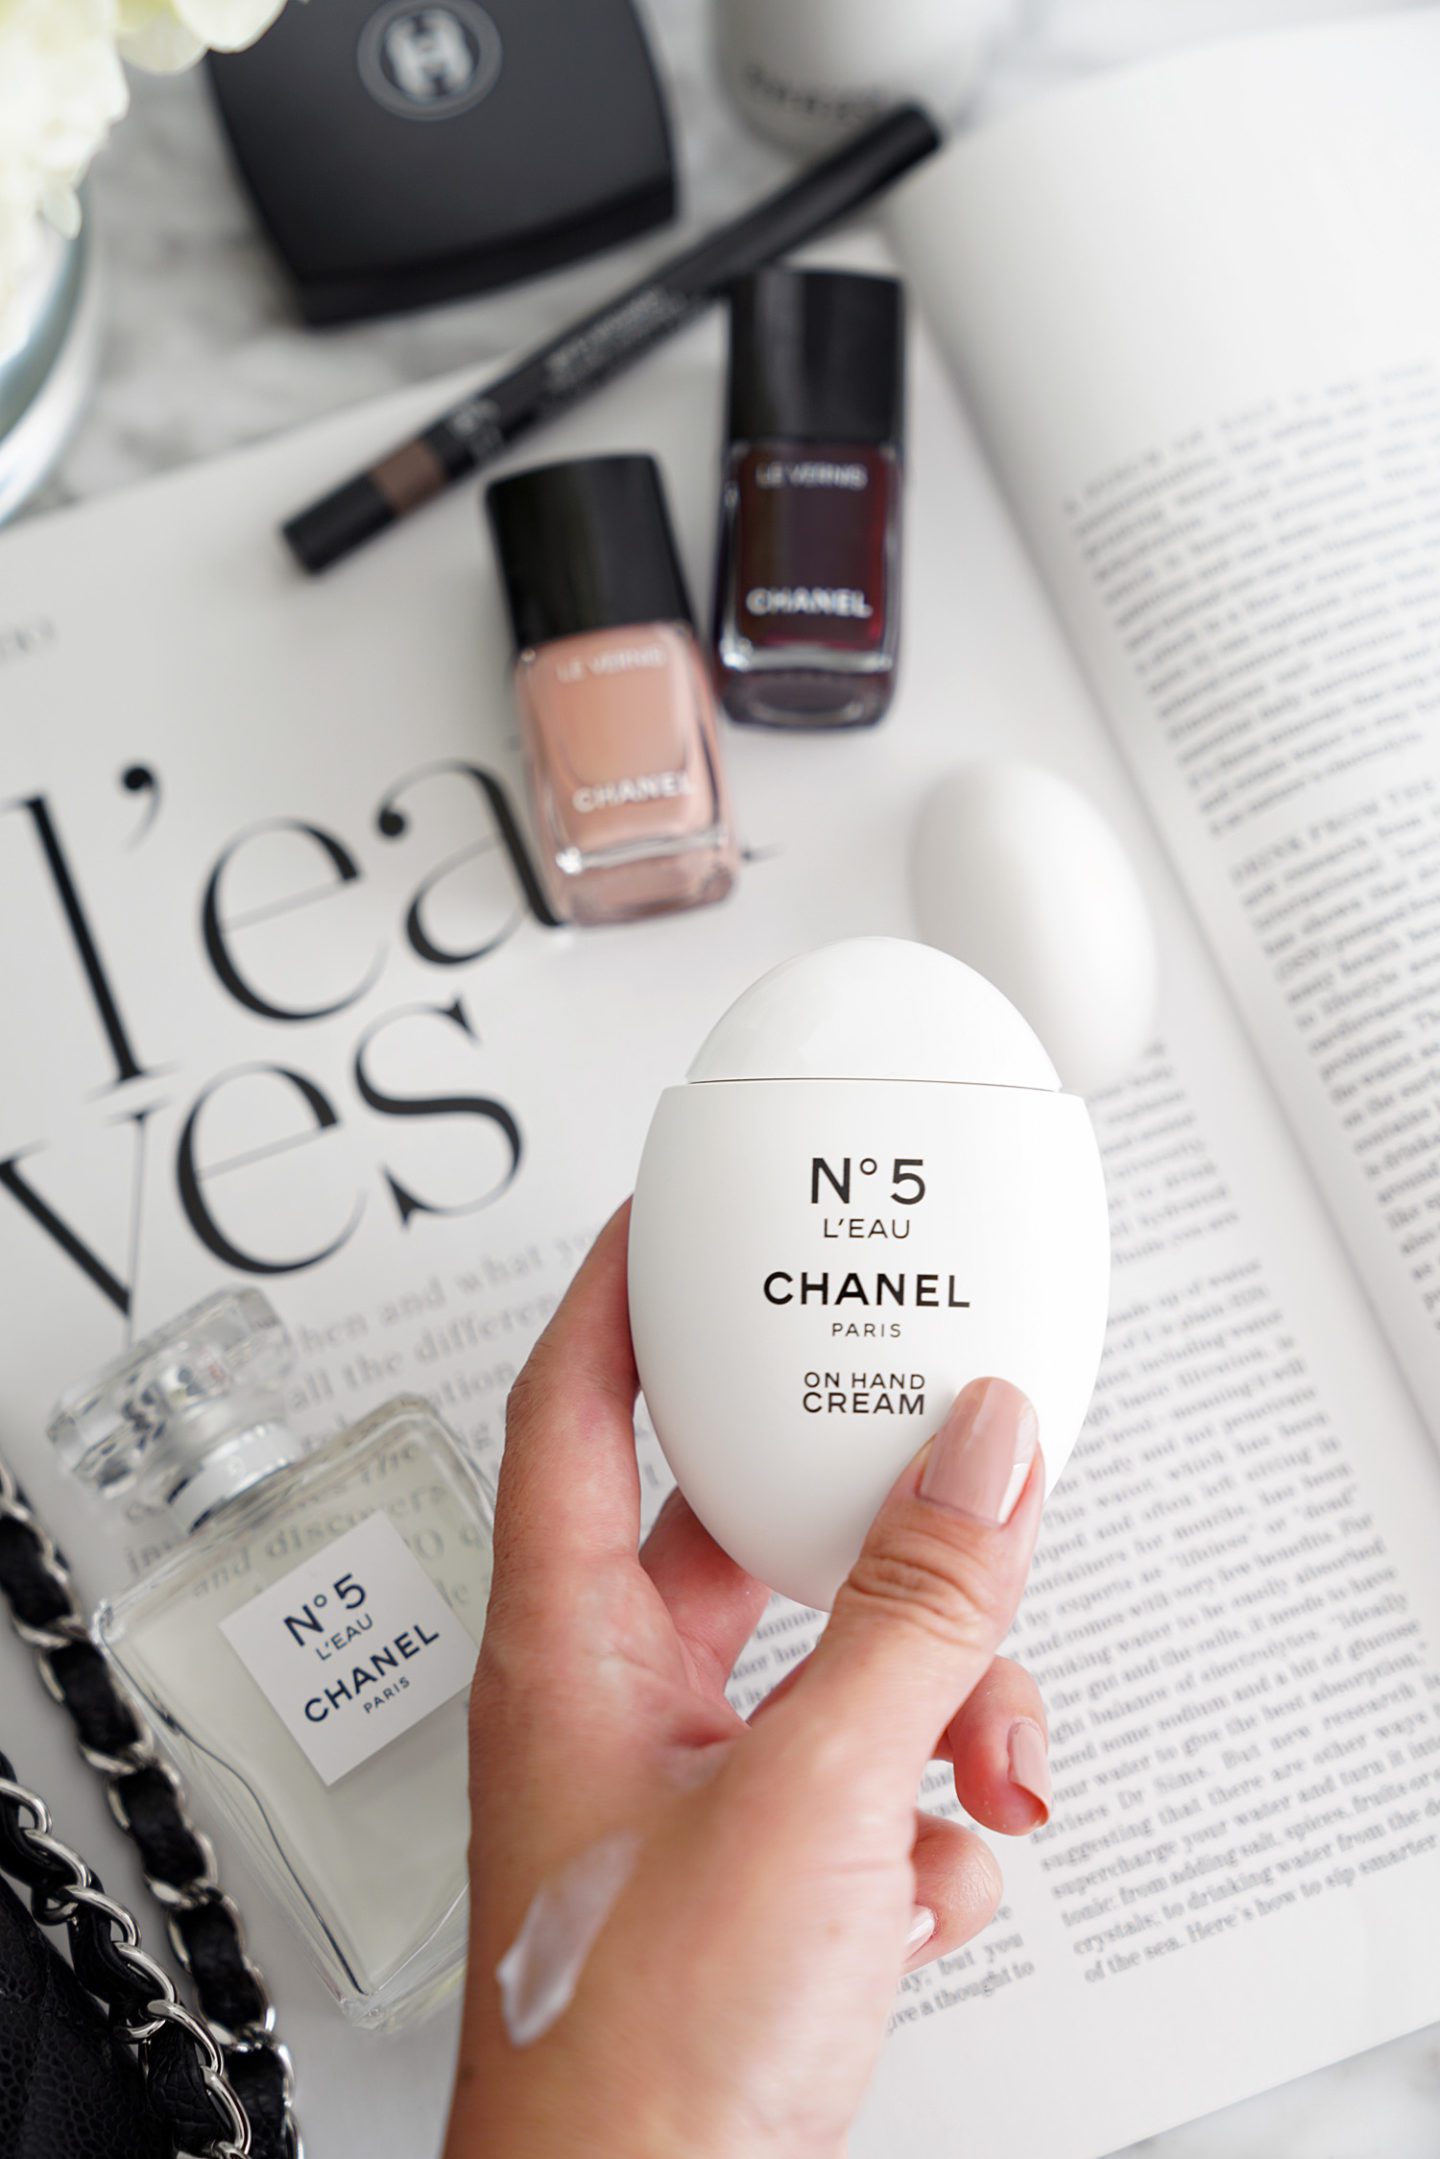 Chanel No 5 L'Eau On Hand Cream review